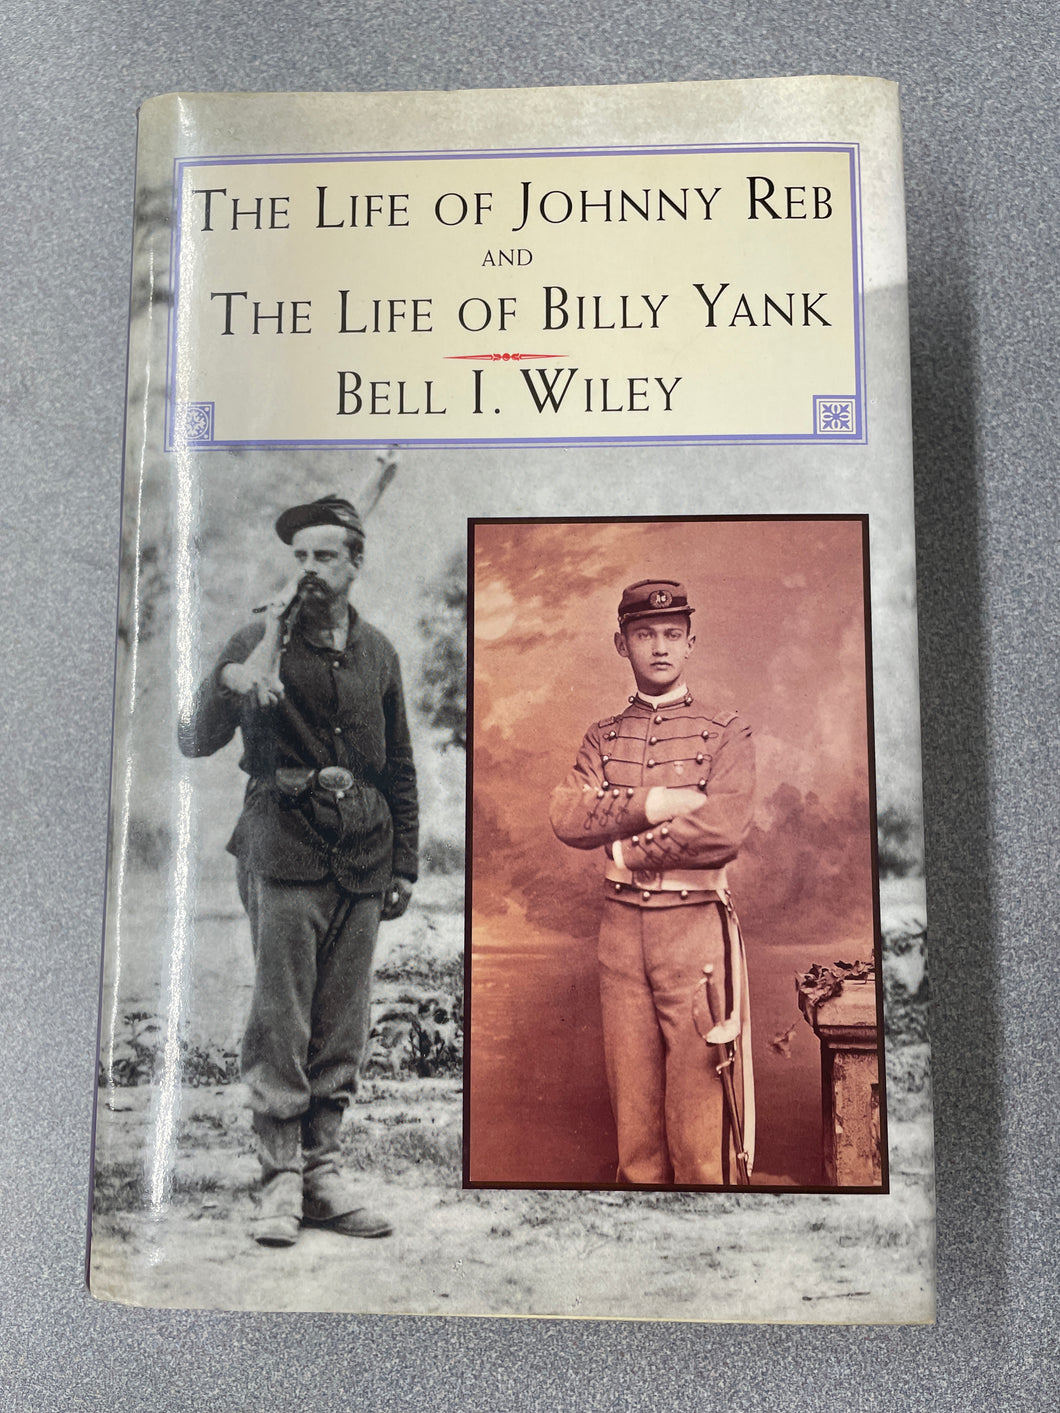 The Life of Johnny Reb and The Life of Billy Yank, Wiley, Bell I. [1994] H 12/23